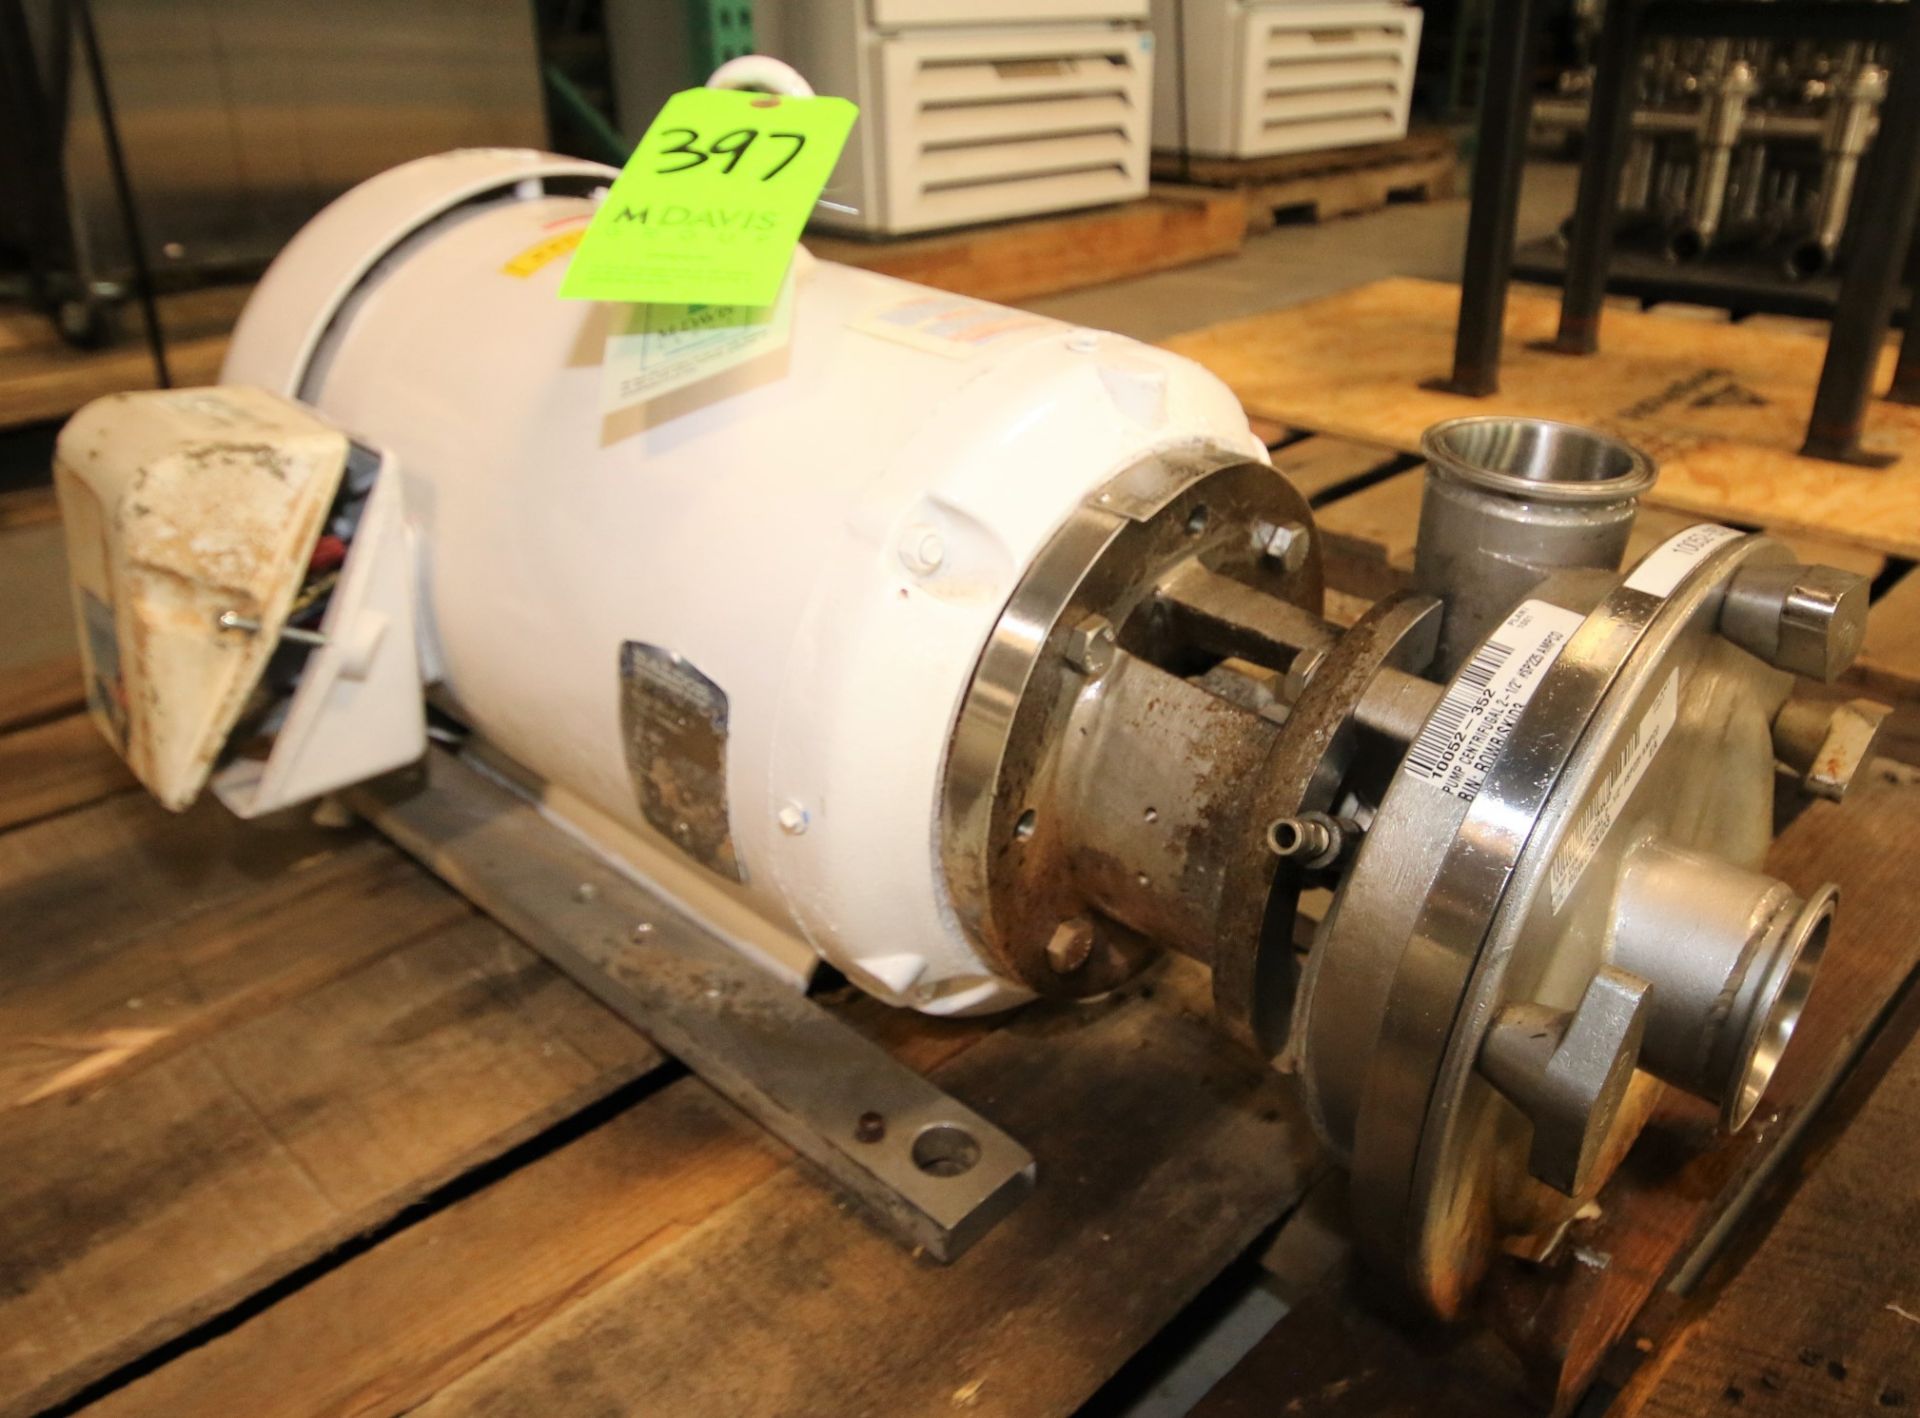 Ampco 20 hp Centrifugal Pump, Model ASP225-2525-25, SN CC-59122-1-1, with 2.5" x 2.5" Clamp Type